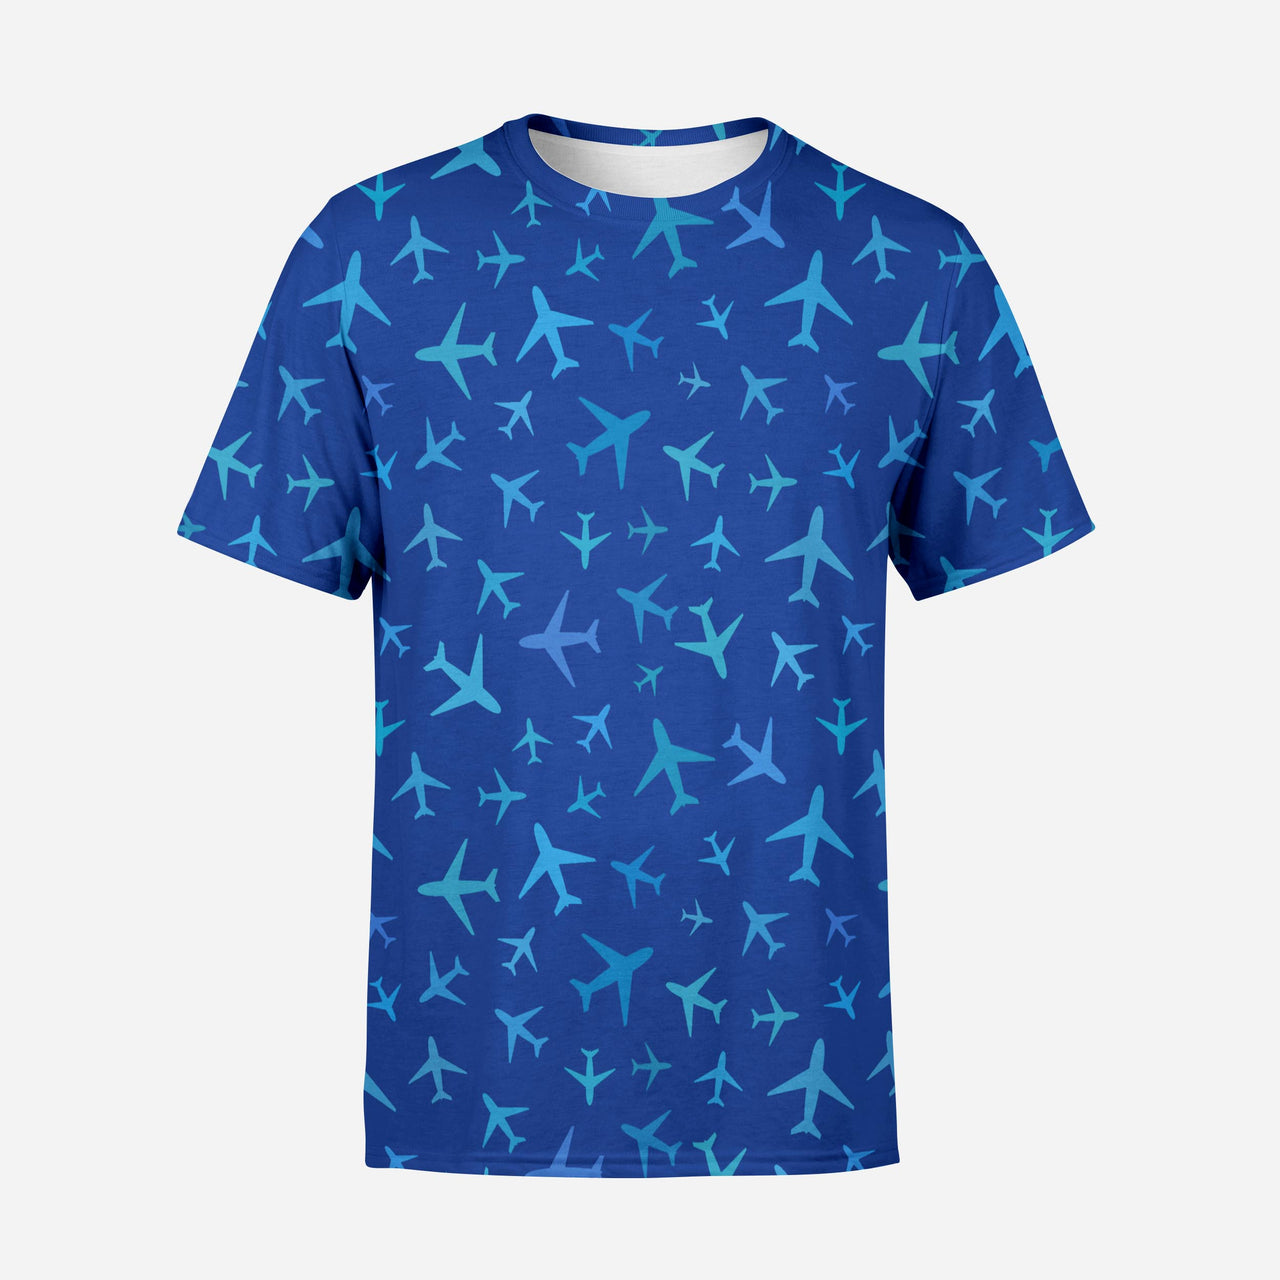 Many Airplanes (Blue) Printed 3D T-Shirts